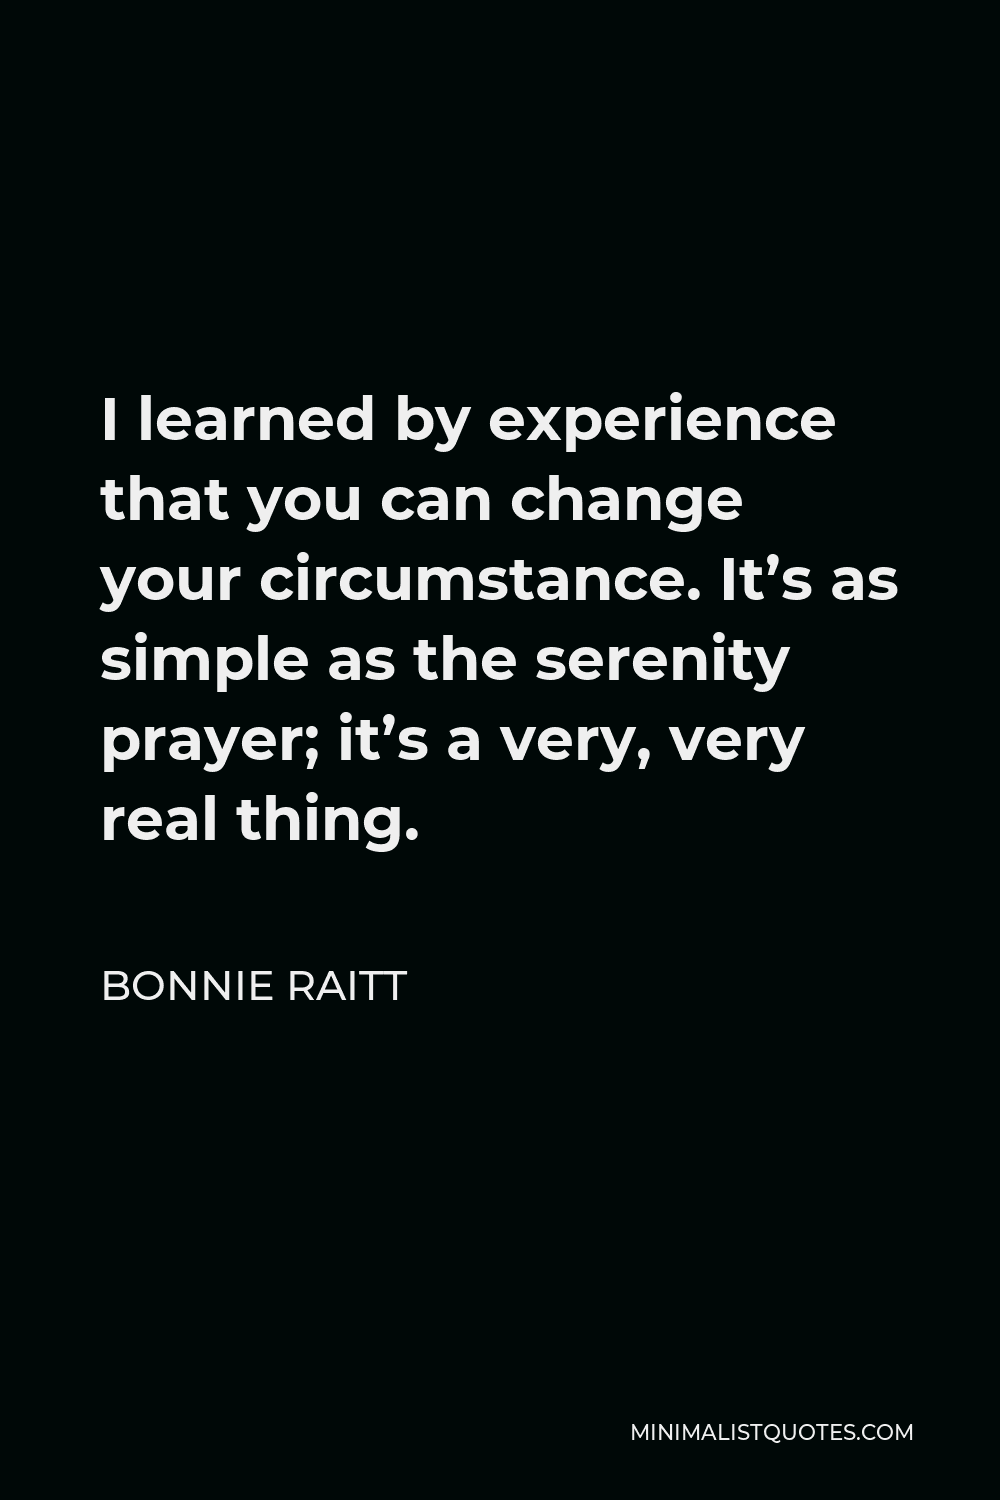 Bonnie Raitt Quote - I learned by experience that you can change your circumstance. It’s as simple as the serenity prayer; it’s a very, very real thing.